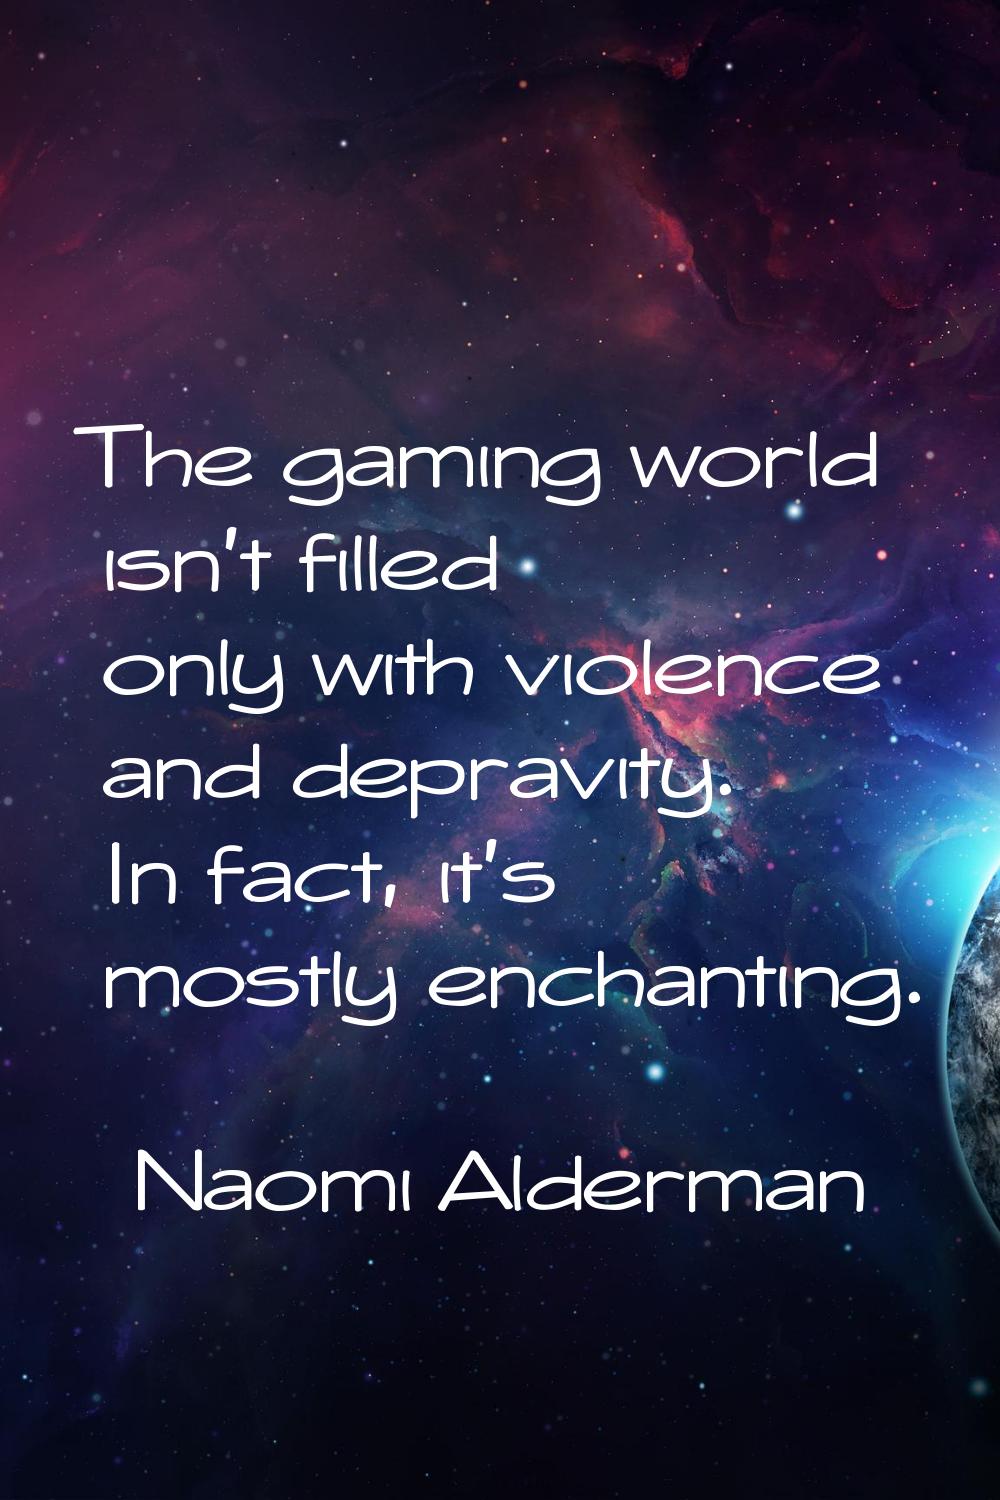 The gaming world isn't filled only with violence and depravity. In fact, it's mostly enchanting.